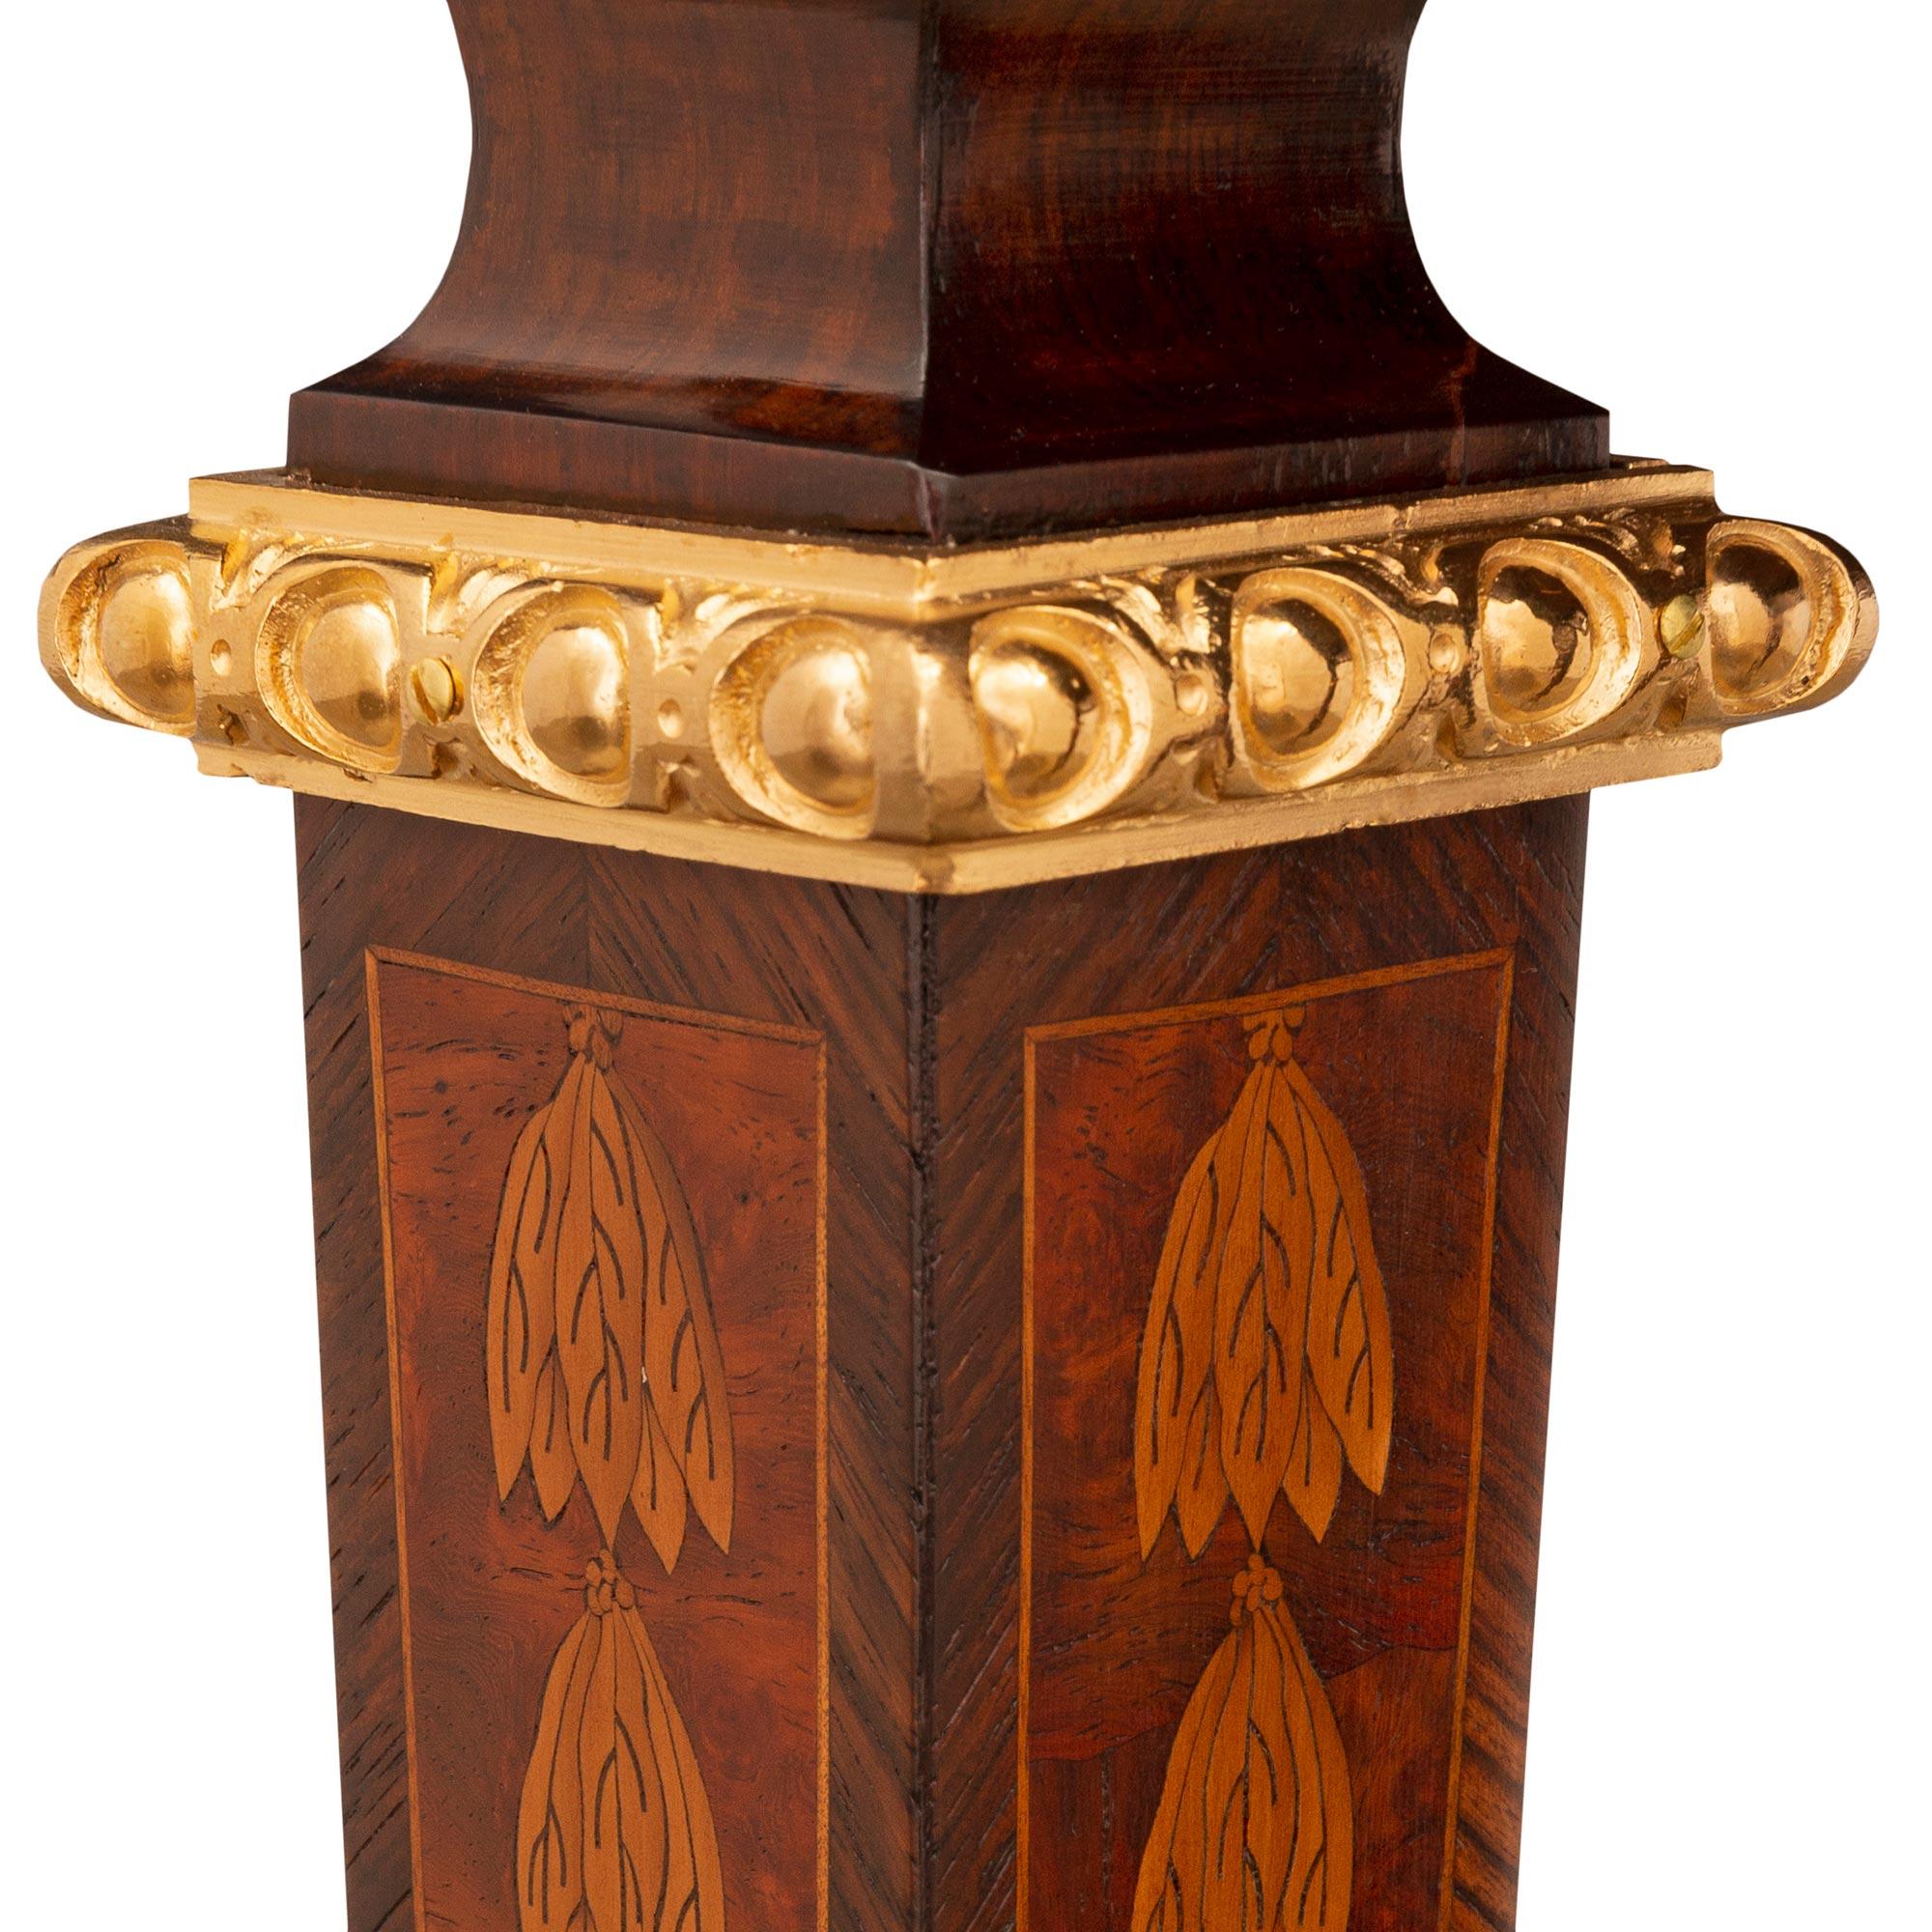 French 19th Century Louis XIV St. Kingwood, Walnut, Ormolu and Marble Side Table For Sale 4